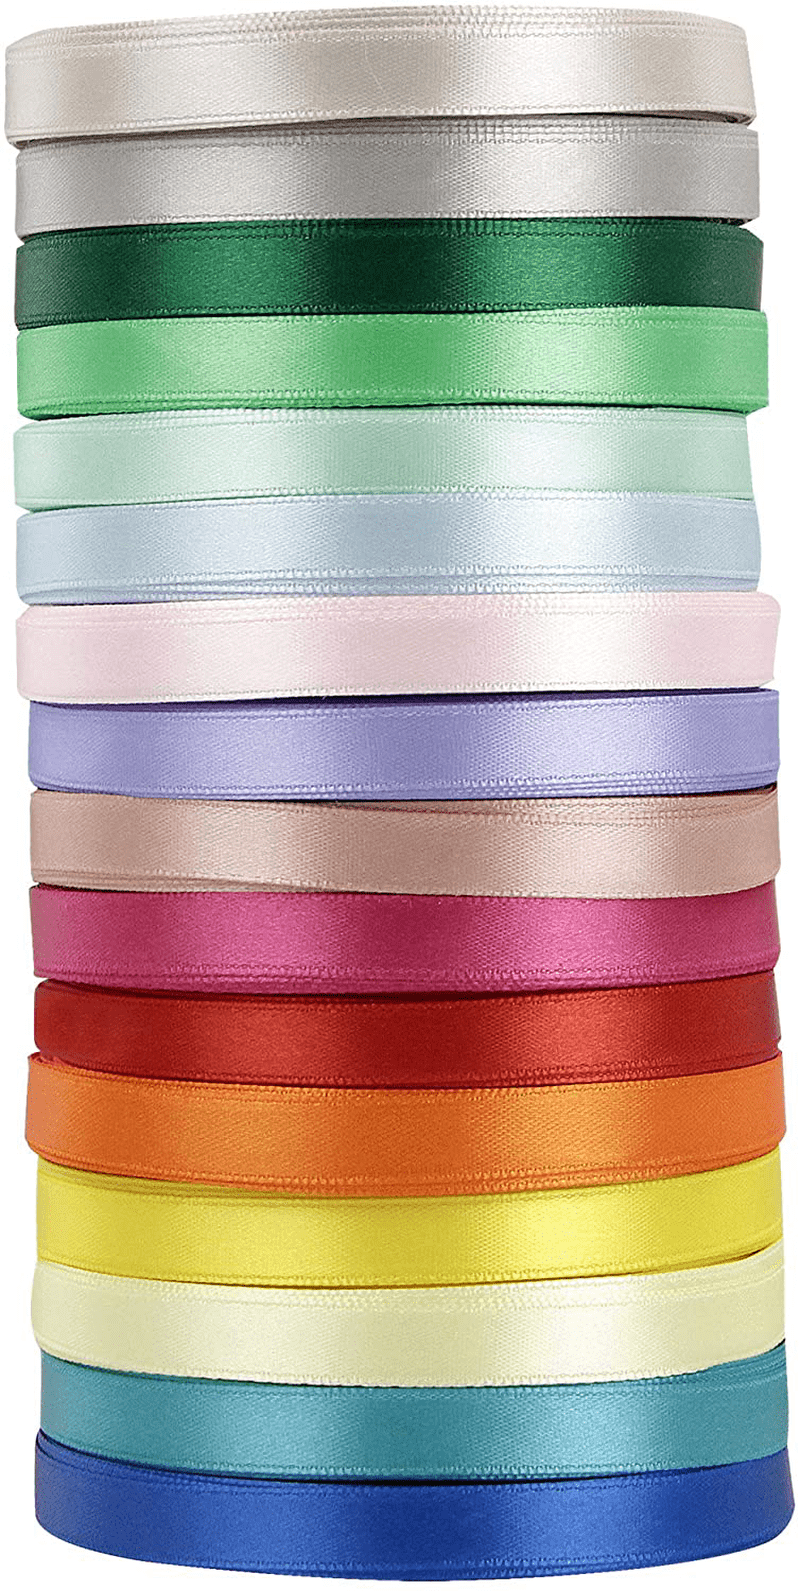 VATIN Assorted Color Satin Wrapping Ribbon 16 Colors 3/8 inches,25 Yard/Rolls, Ribbon for Gift Wrapping, Perfect for Embroidery/braiding/Girls Hair Ribbons/Leis and Wands -400 Yds